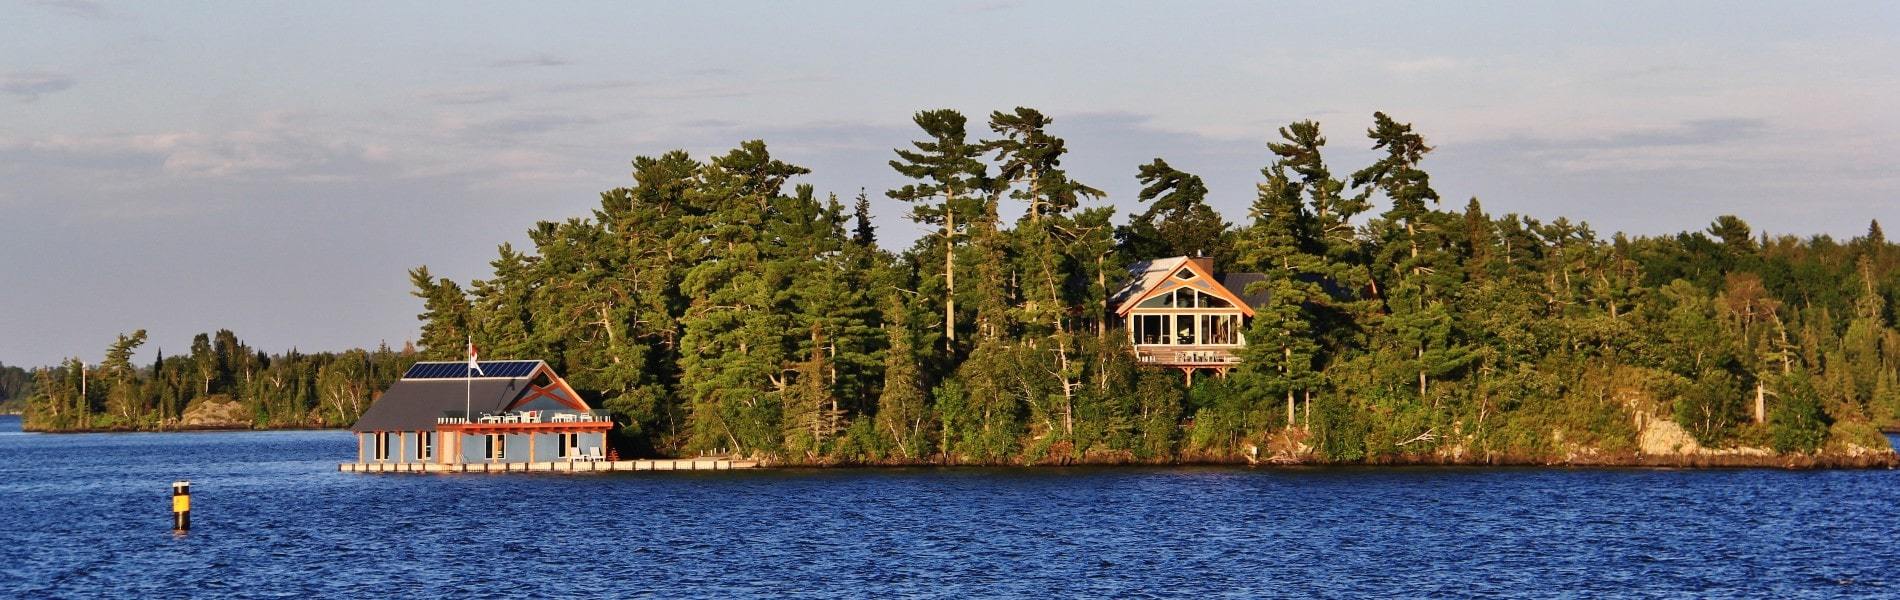 View of cottages on Ontario Lake